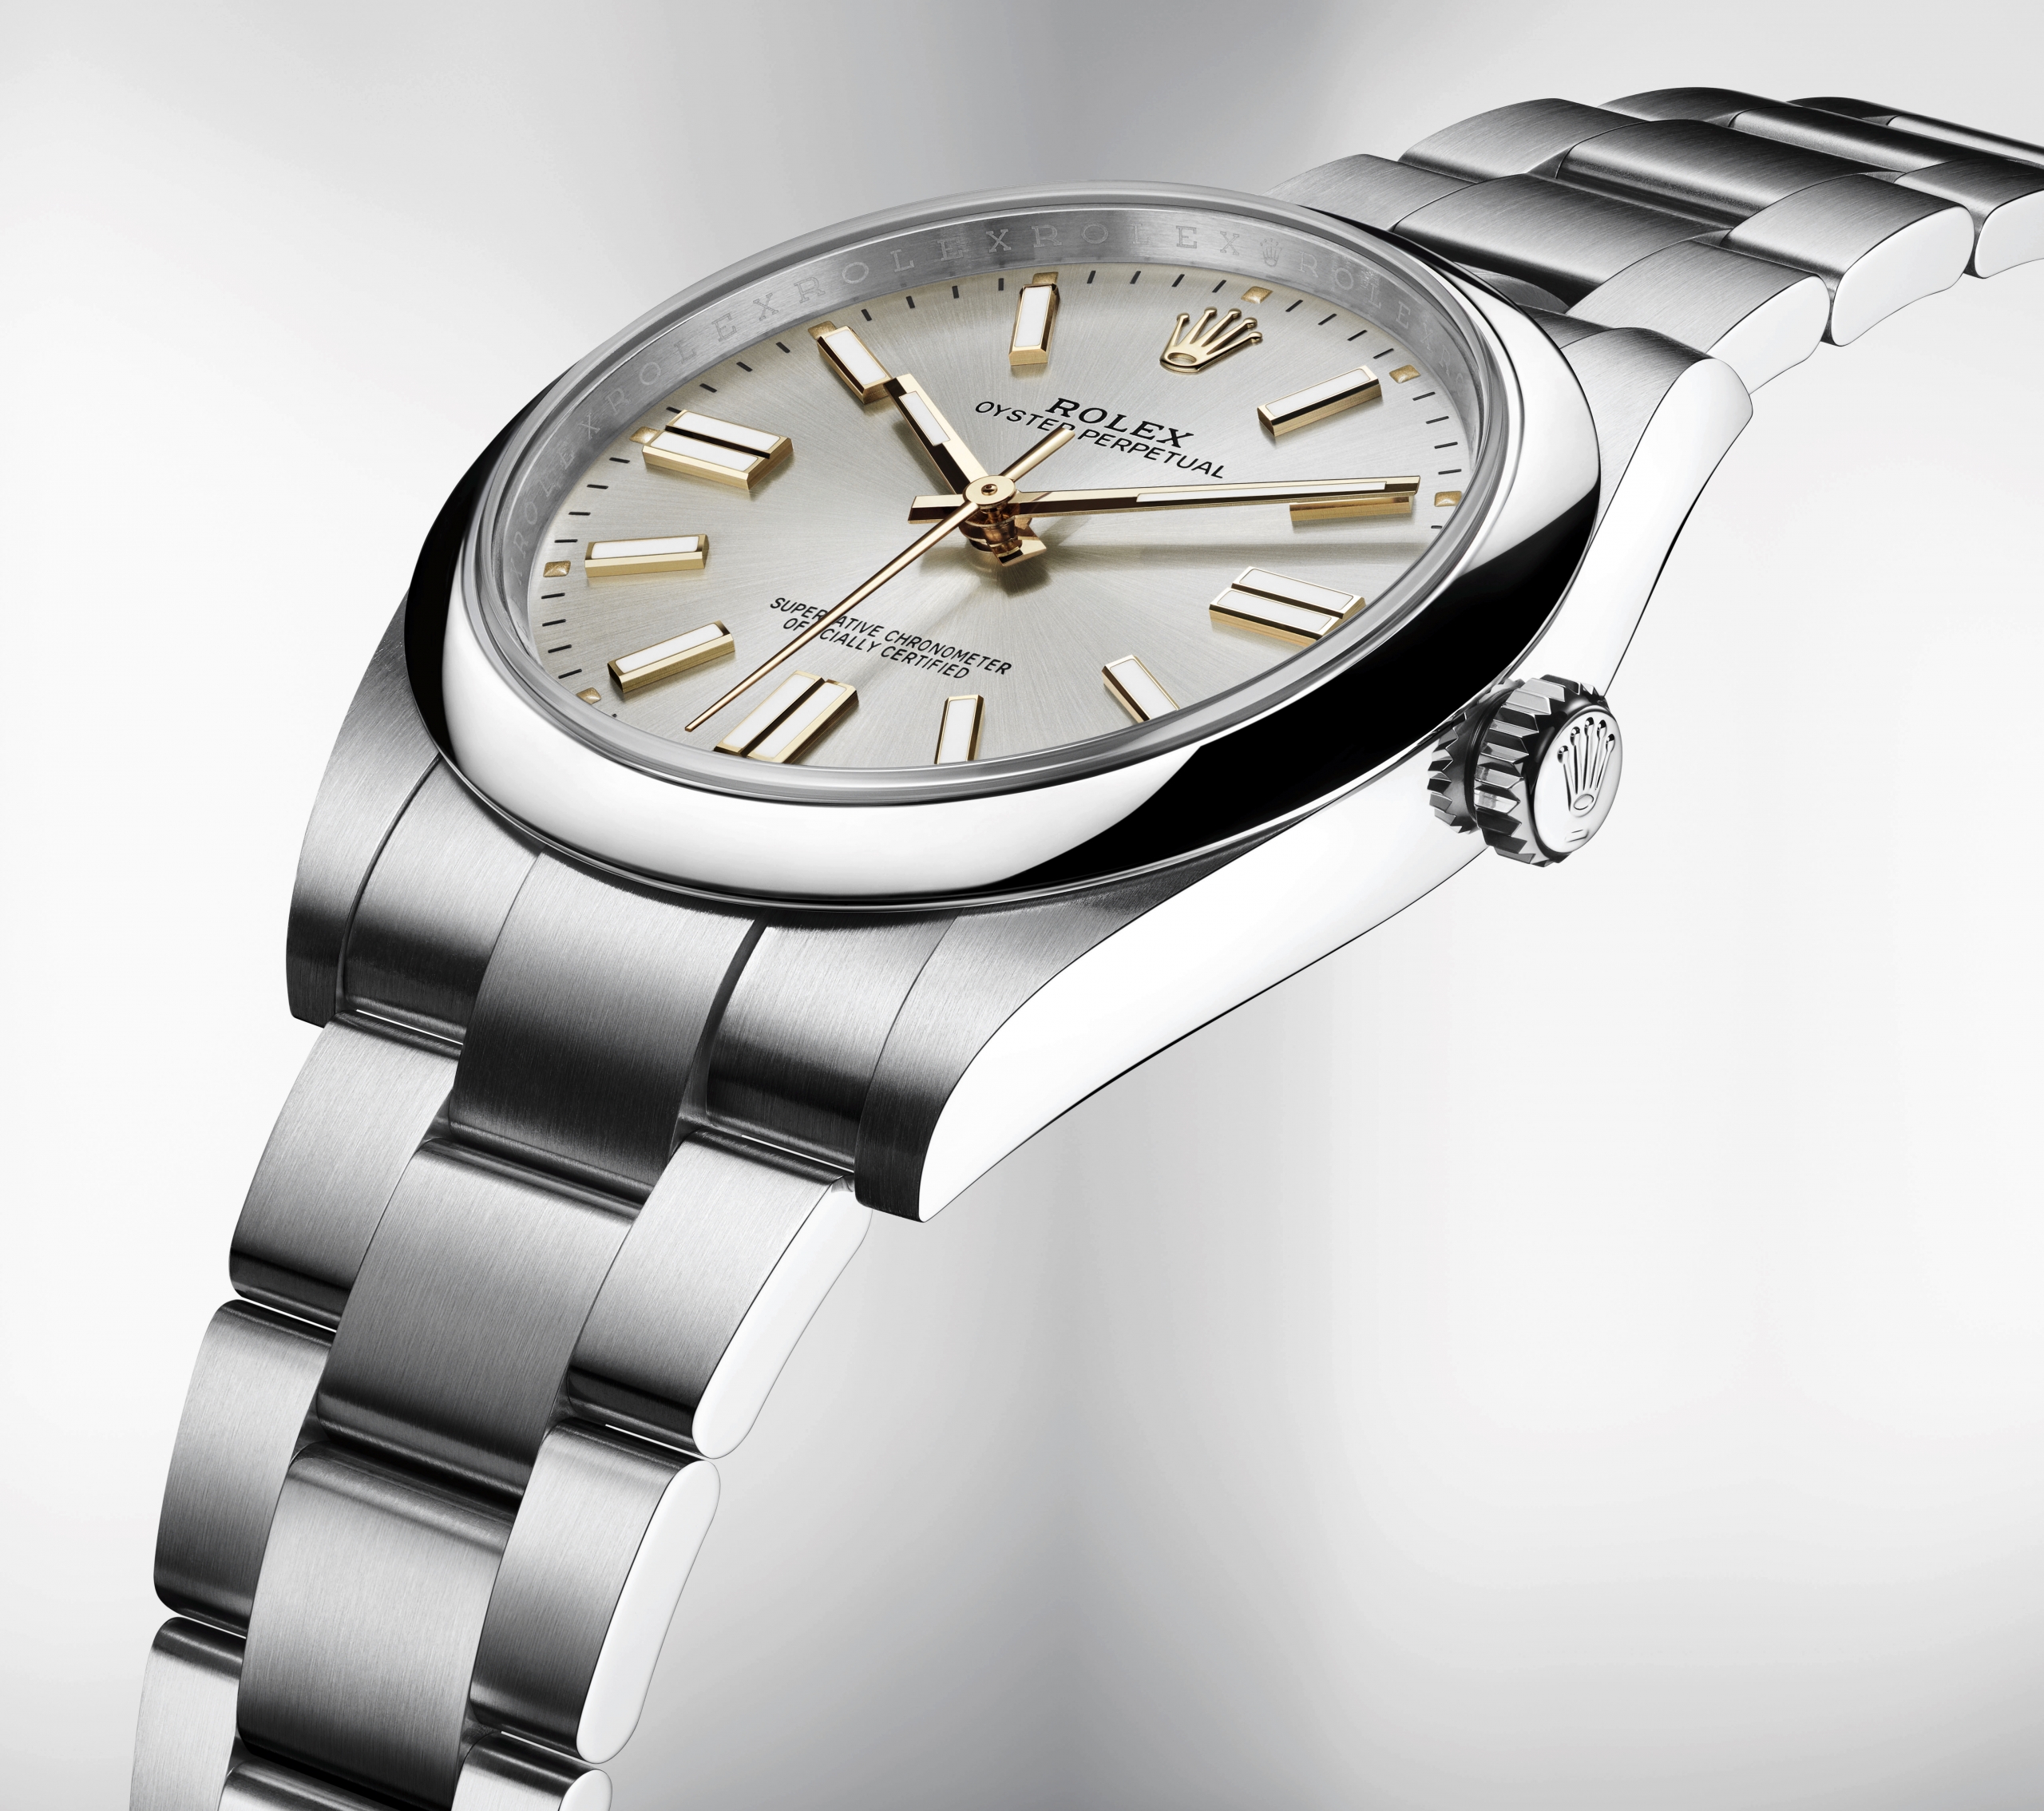 The 2020 Rolex Oyster Perpetual 41